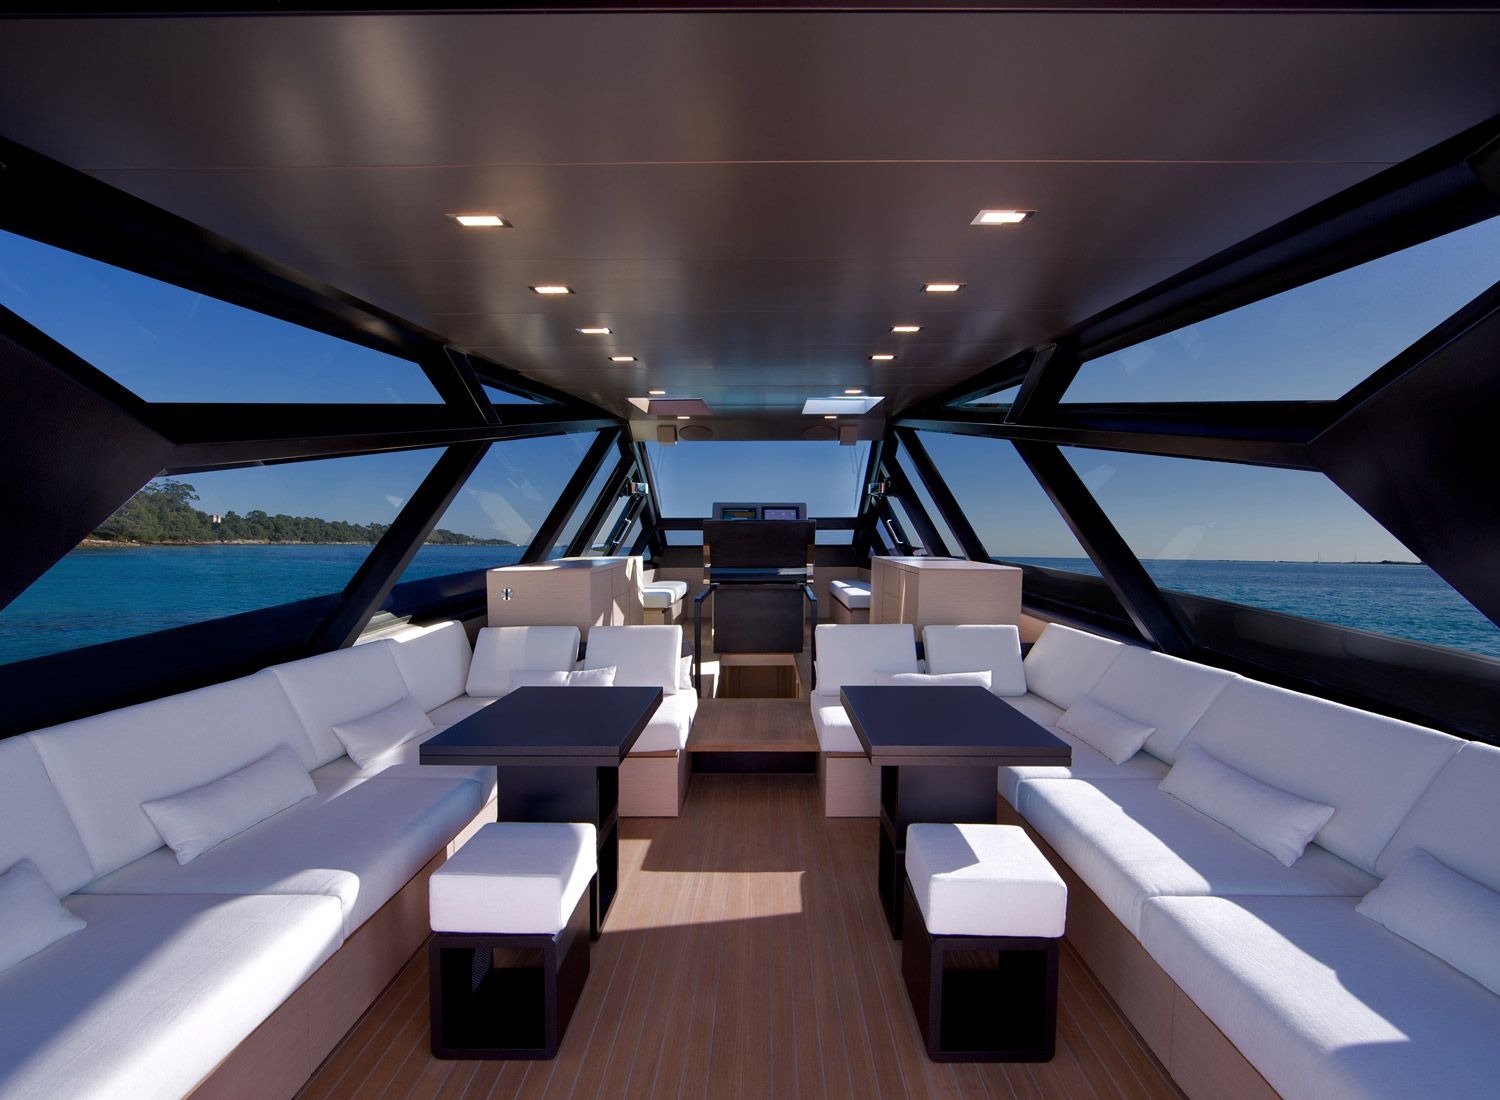 Tips for Designing a Comfortable Boat Interior